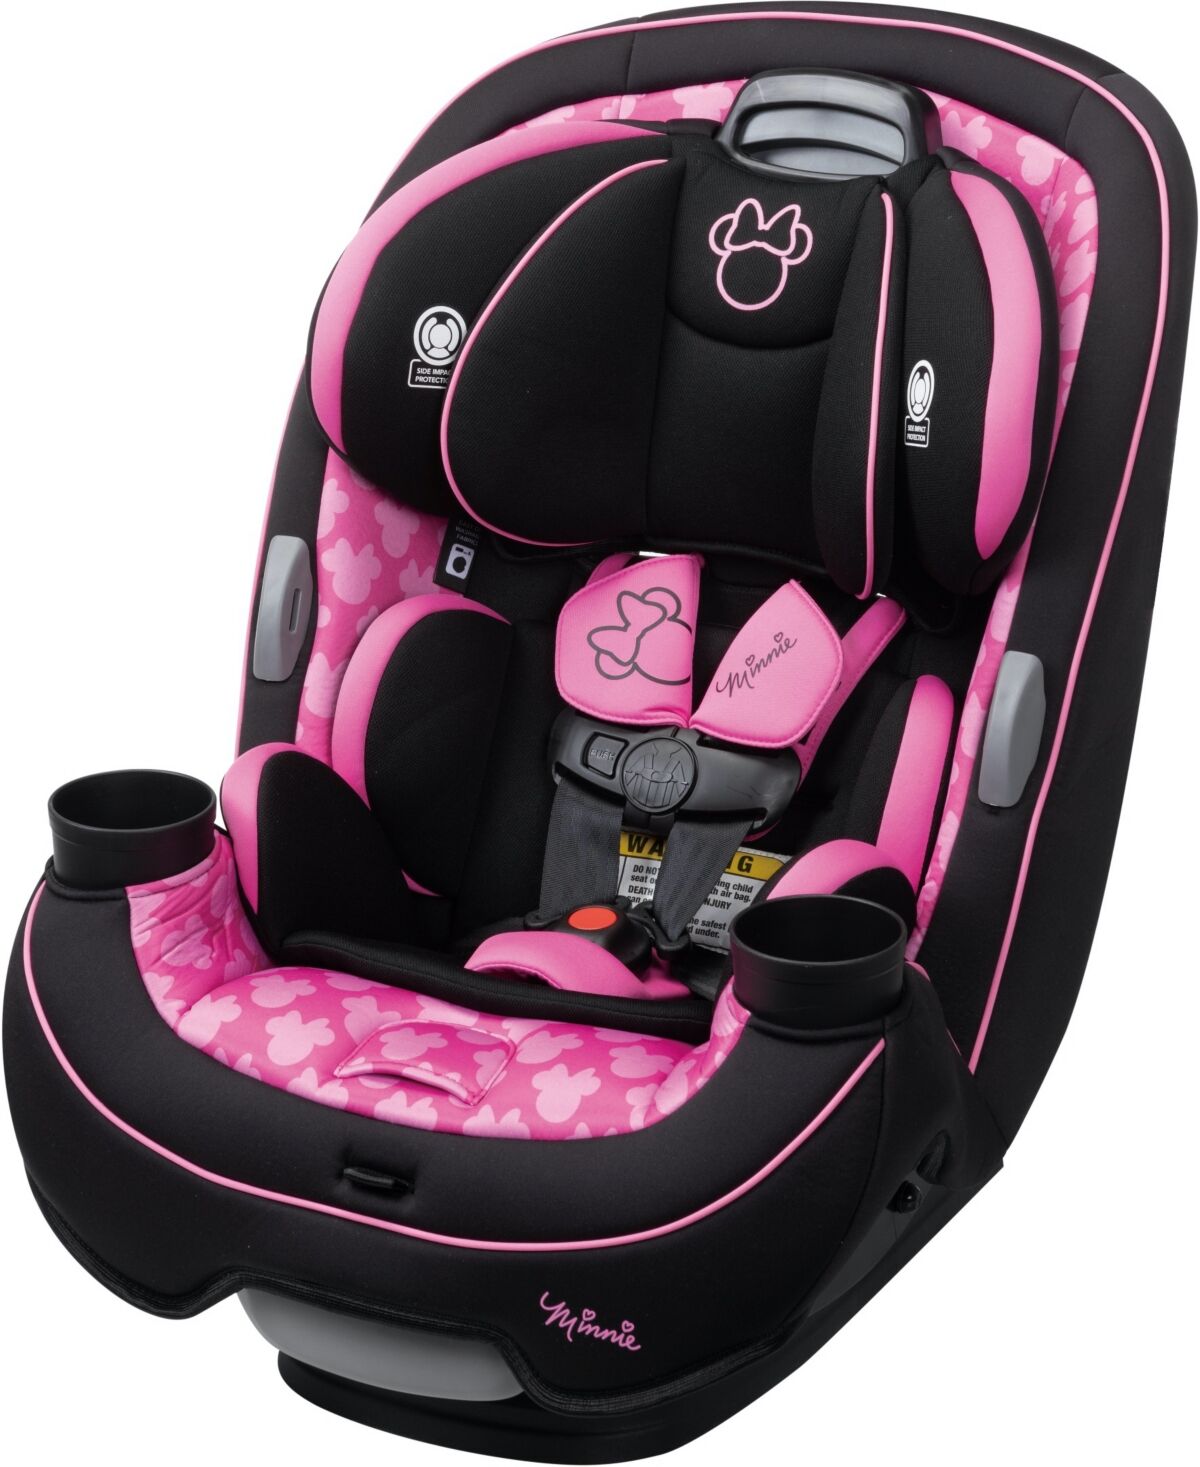 Disney Baby Grow and Go 3-in-1 Convertible One-Hand Adjust Car Seat - Simply Minnie